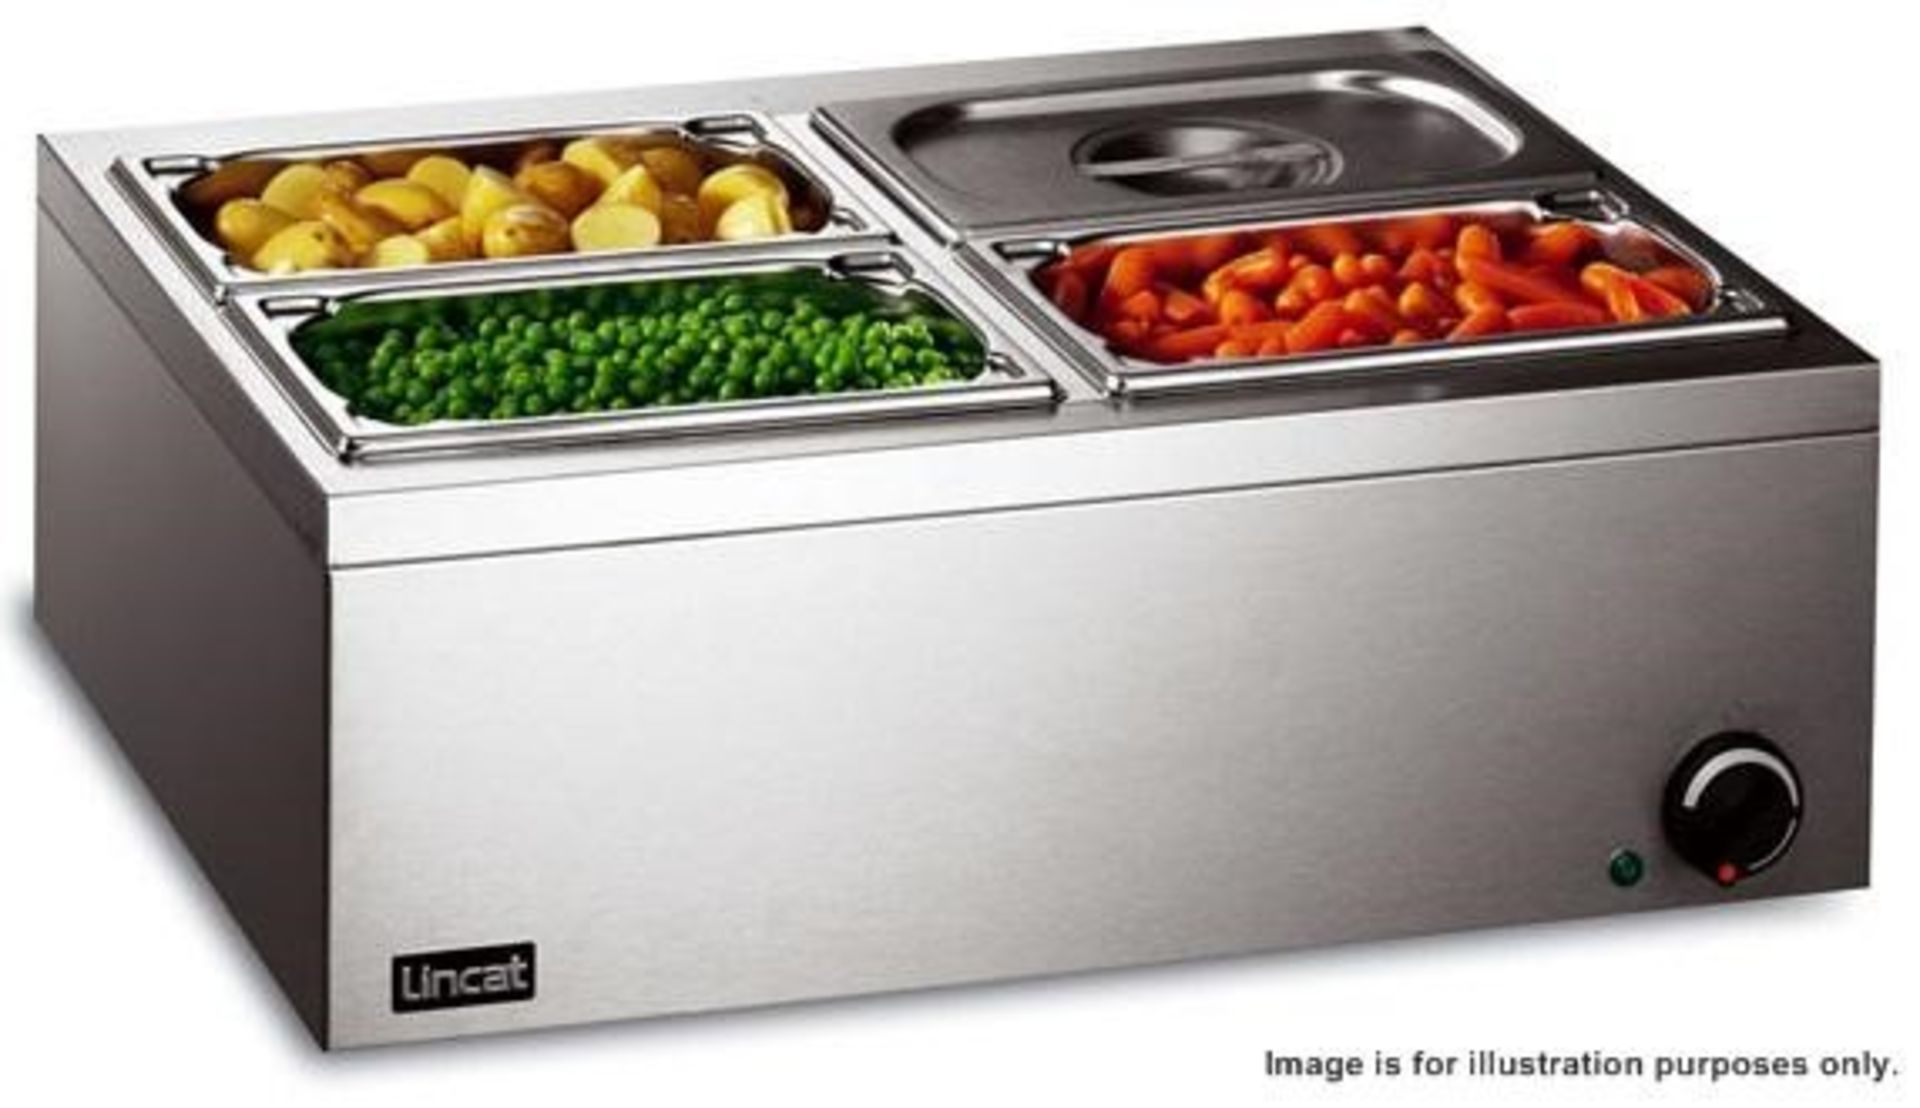 1 x LINCAT Commercial Bain Marie (Model: LBM2W) - 500W Wet And Dry Heat - Stainless Steel Finish - R